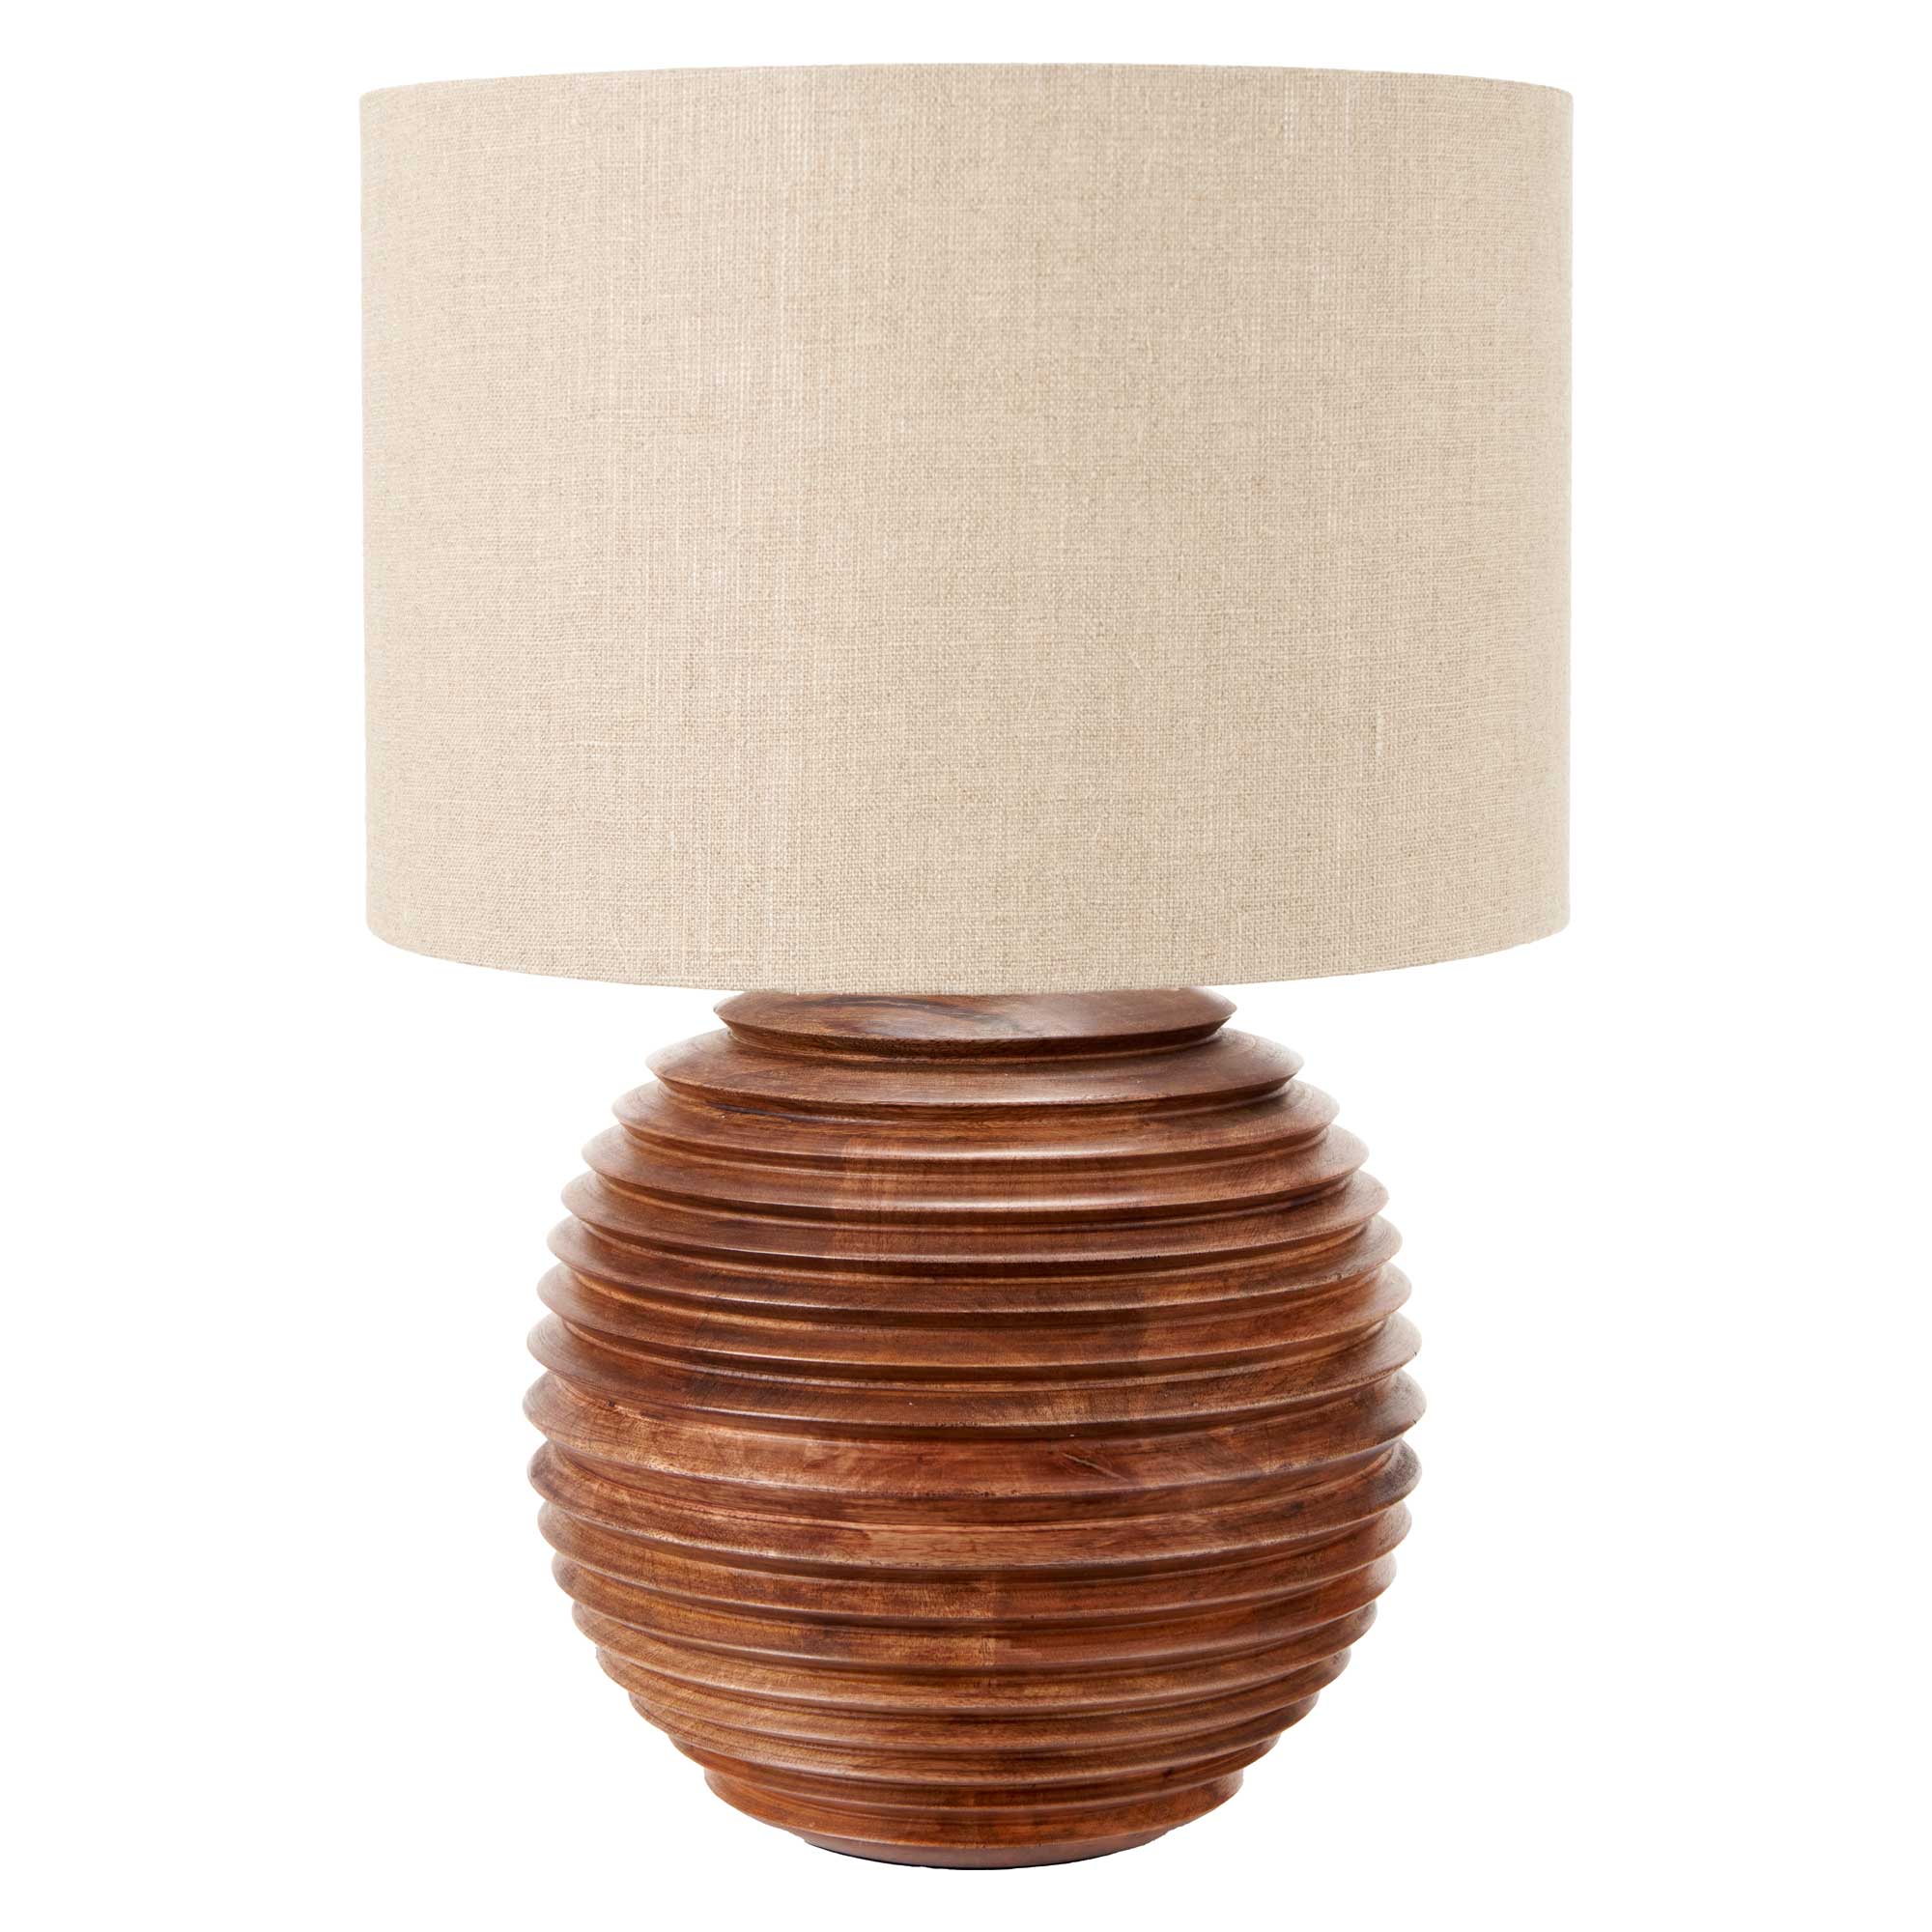 Round Turned Wood Table Lamp, Brown | Barker & Stonehouse